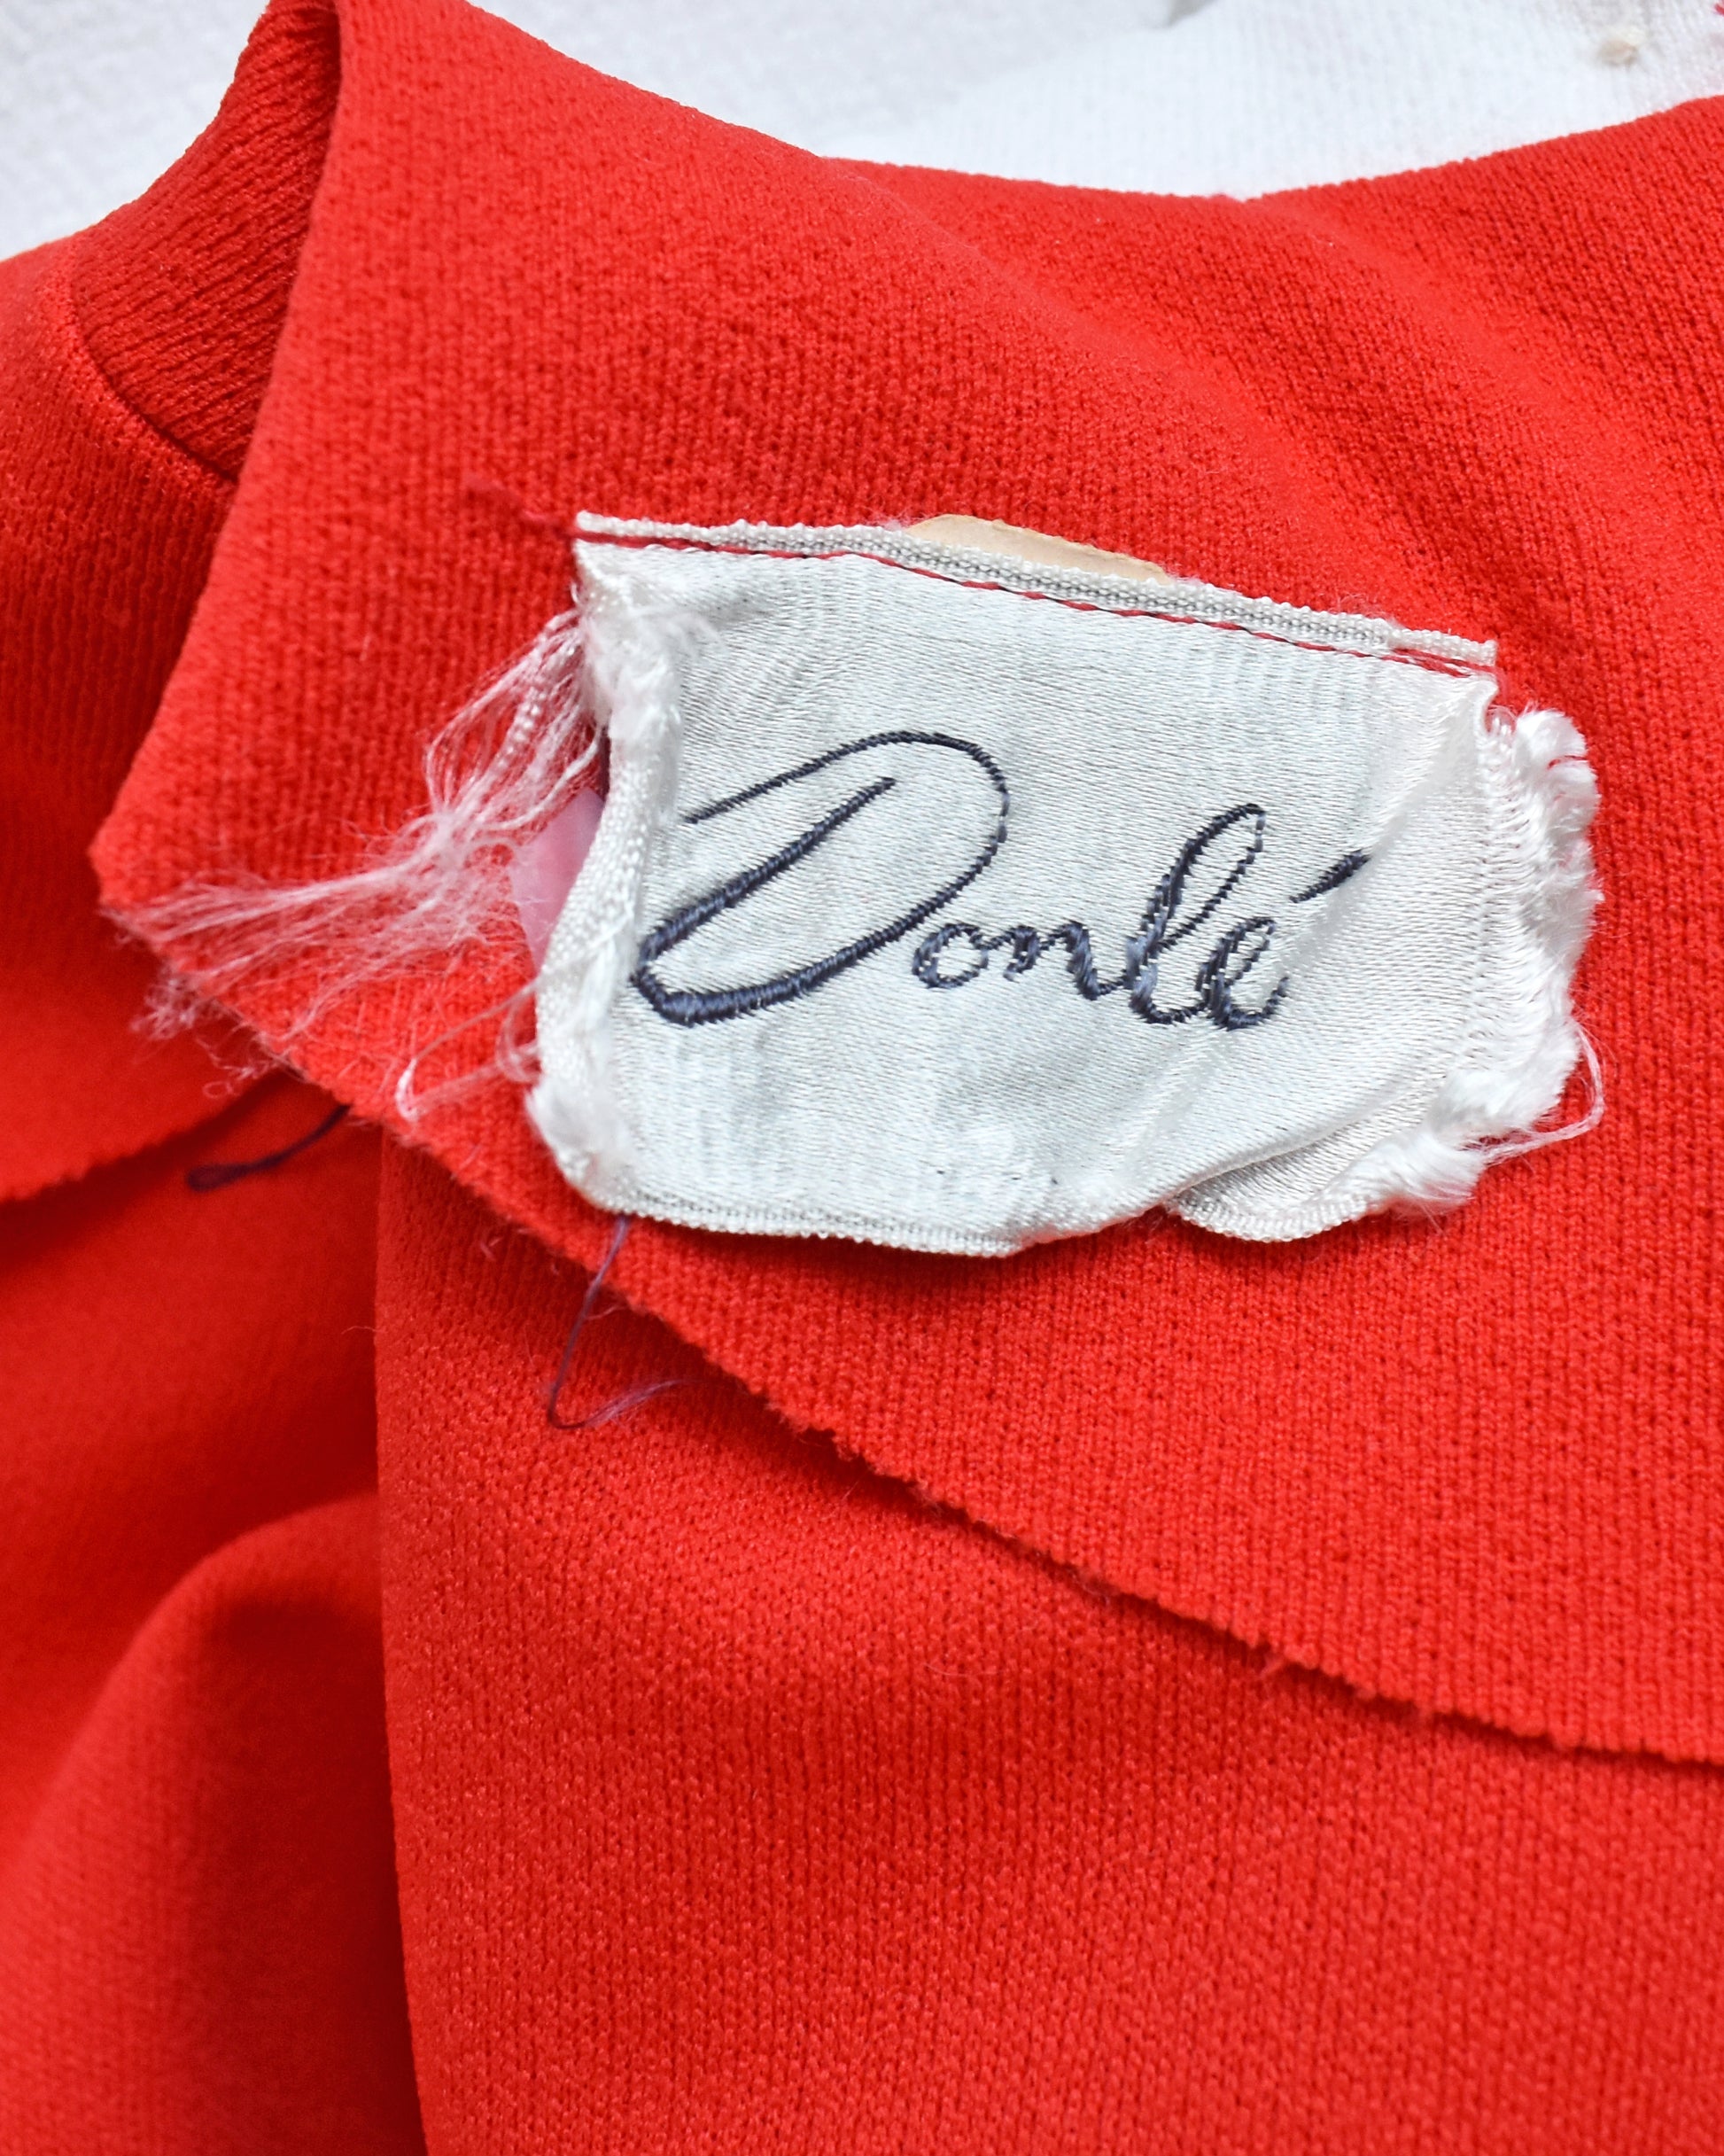 Close up the tag that says Donlé